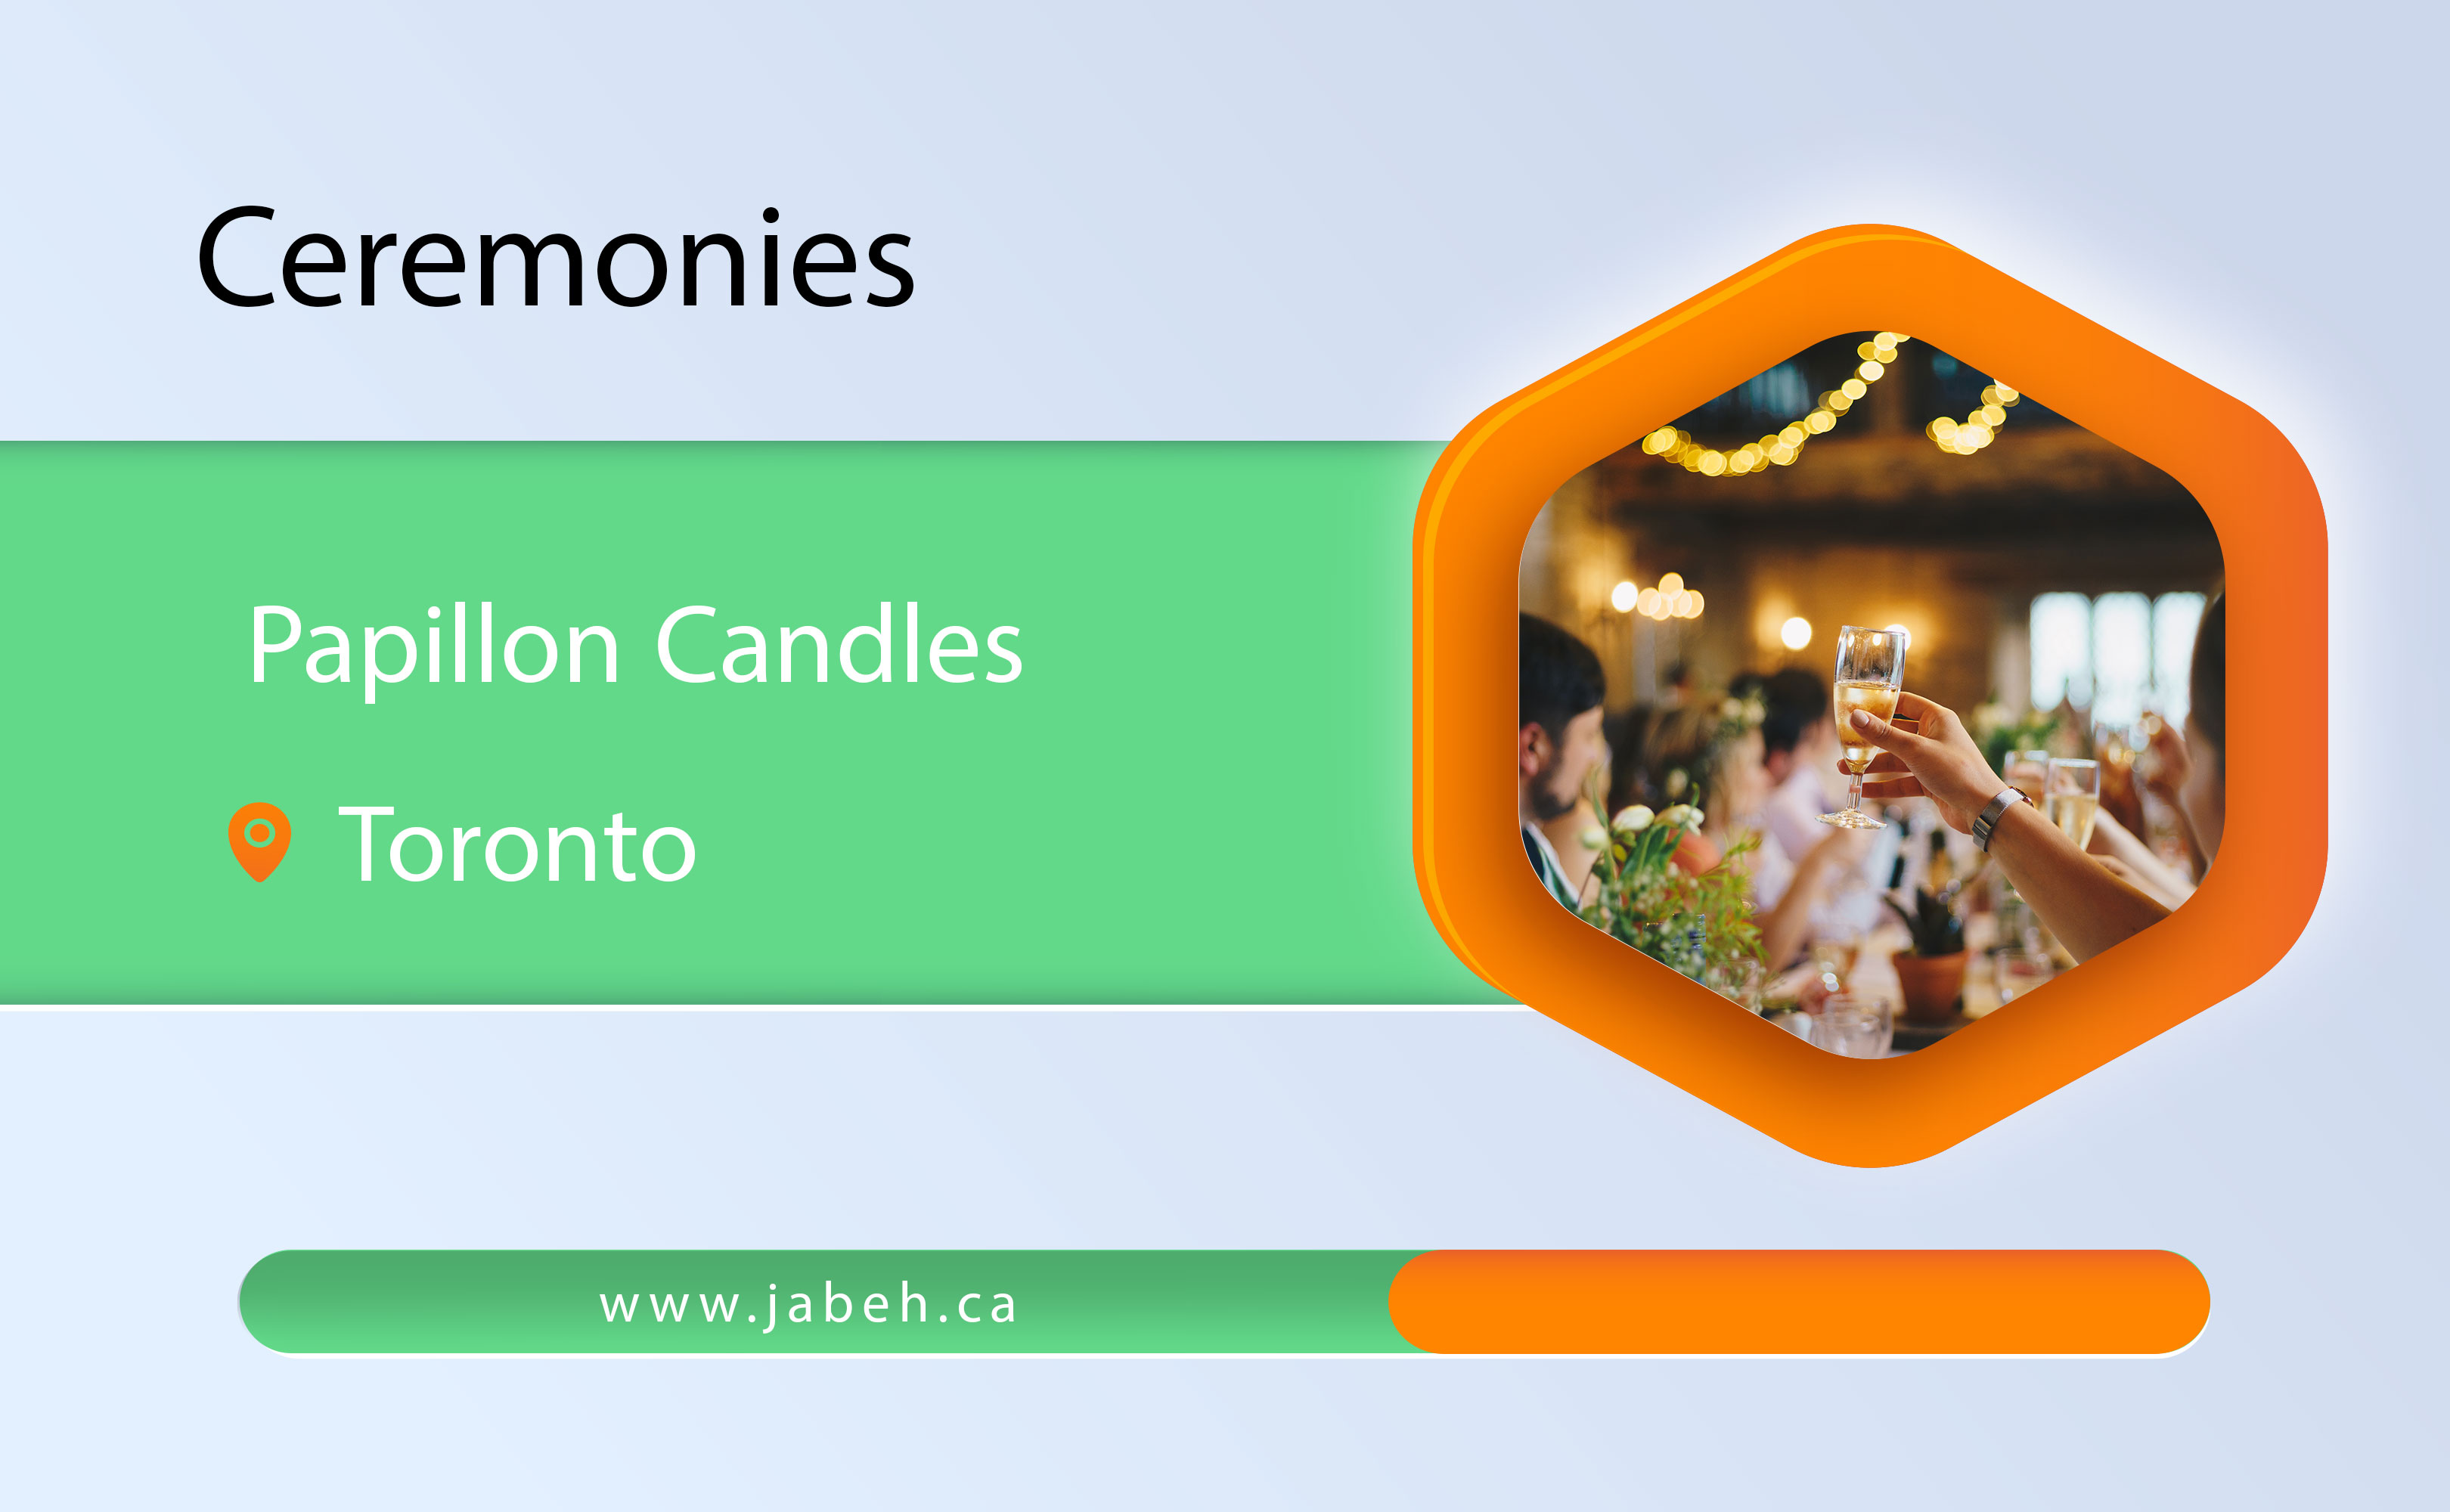 Papillon Candles ceremony in Toronto